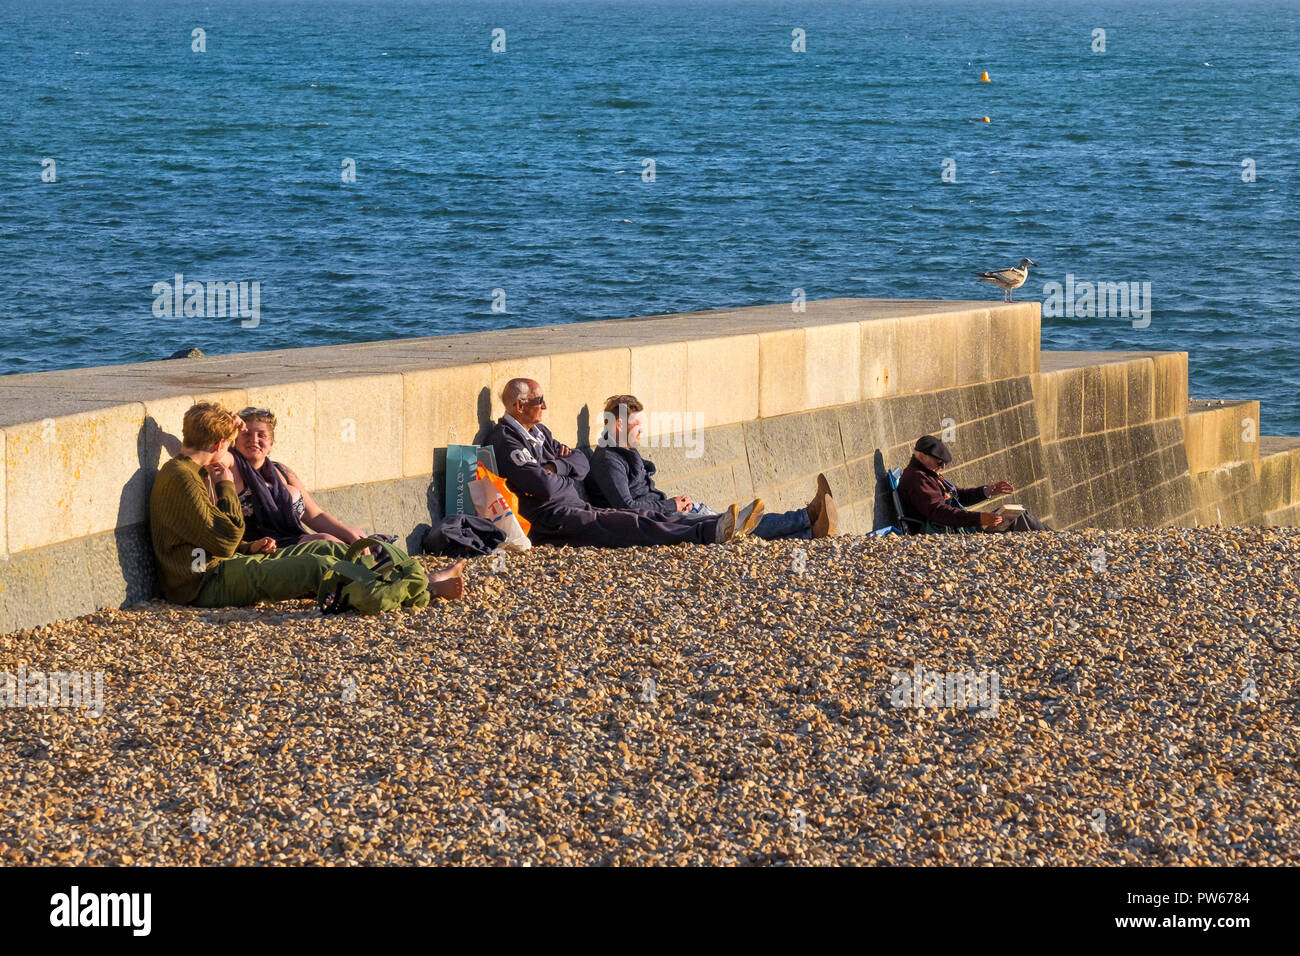 People sitting on the beach enjoying the late evening sunlight in the coastal town of Lyme Regis in Dorset. Stock Photo